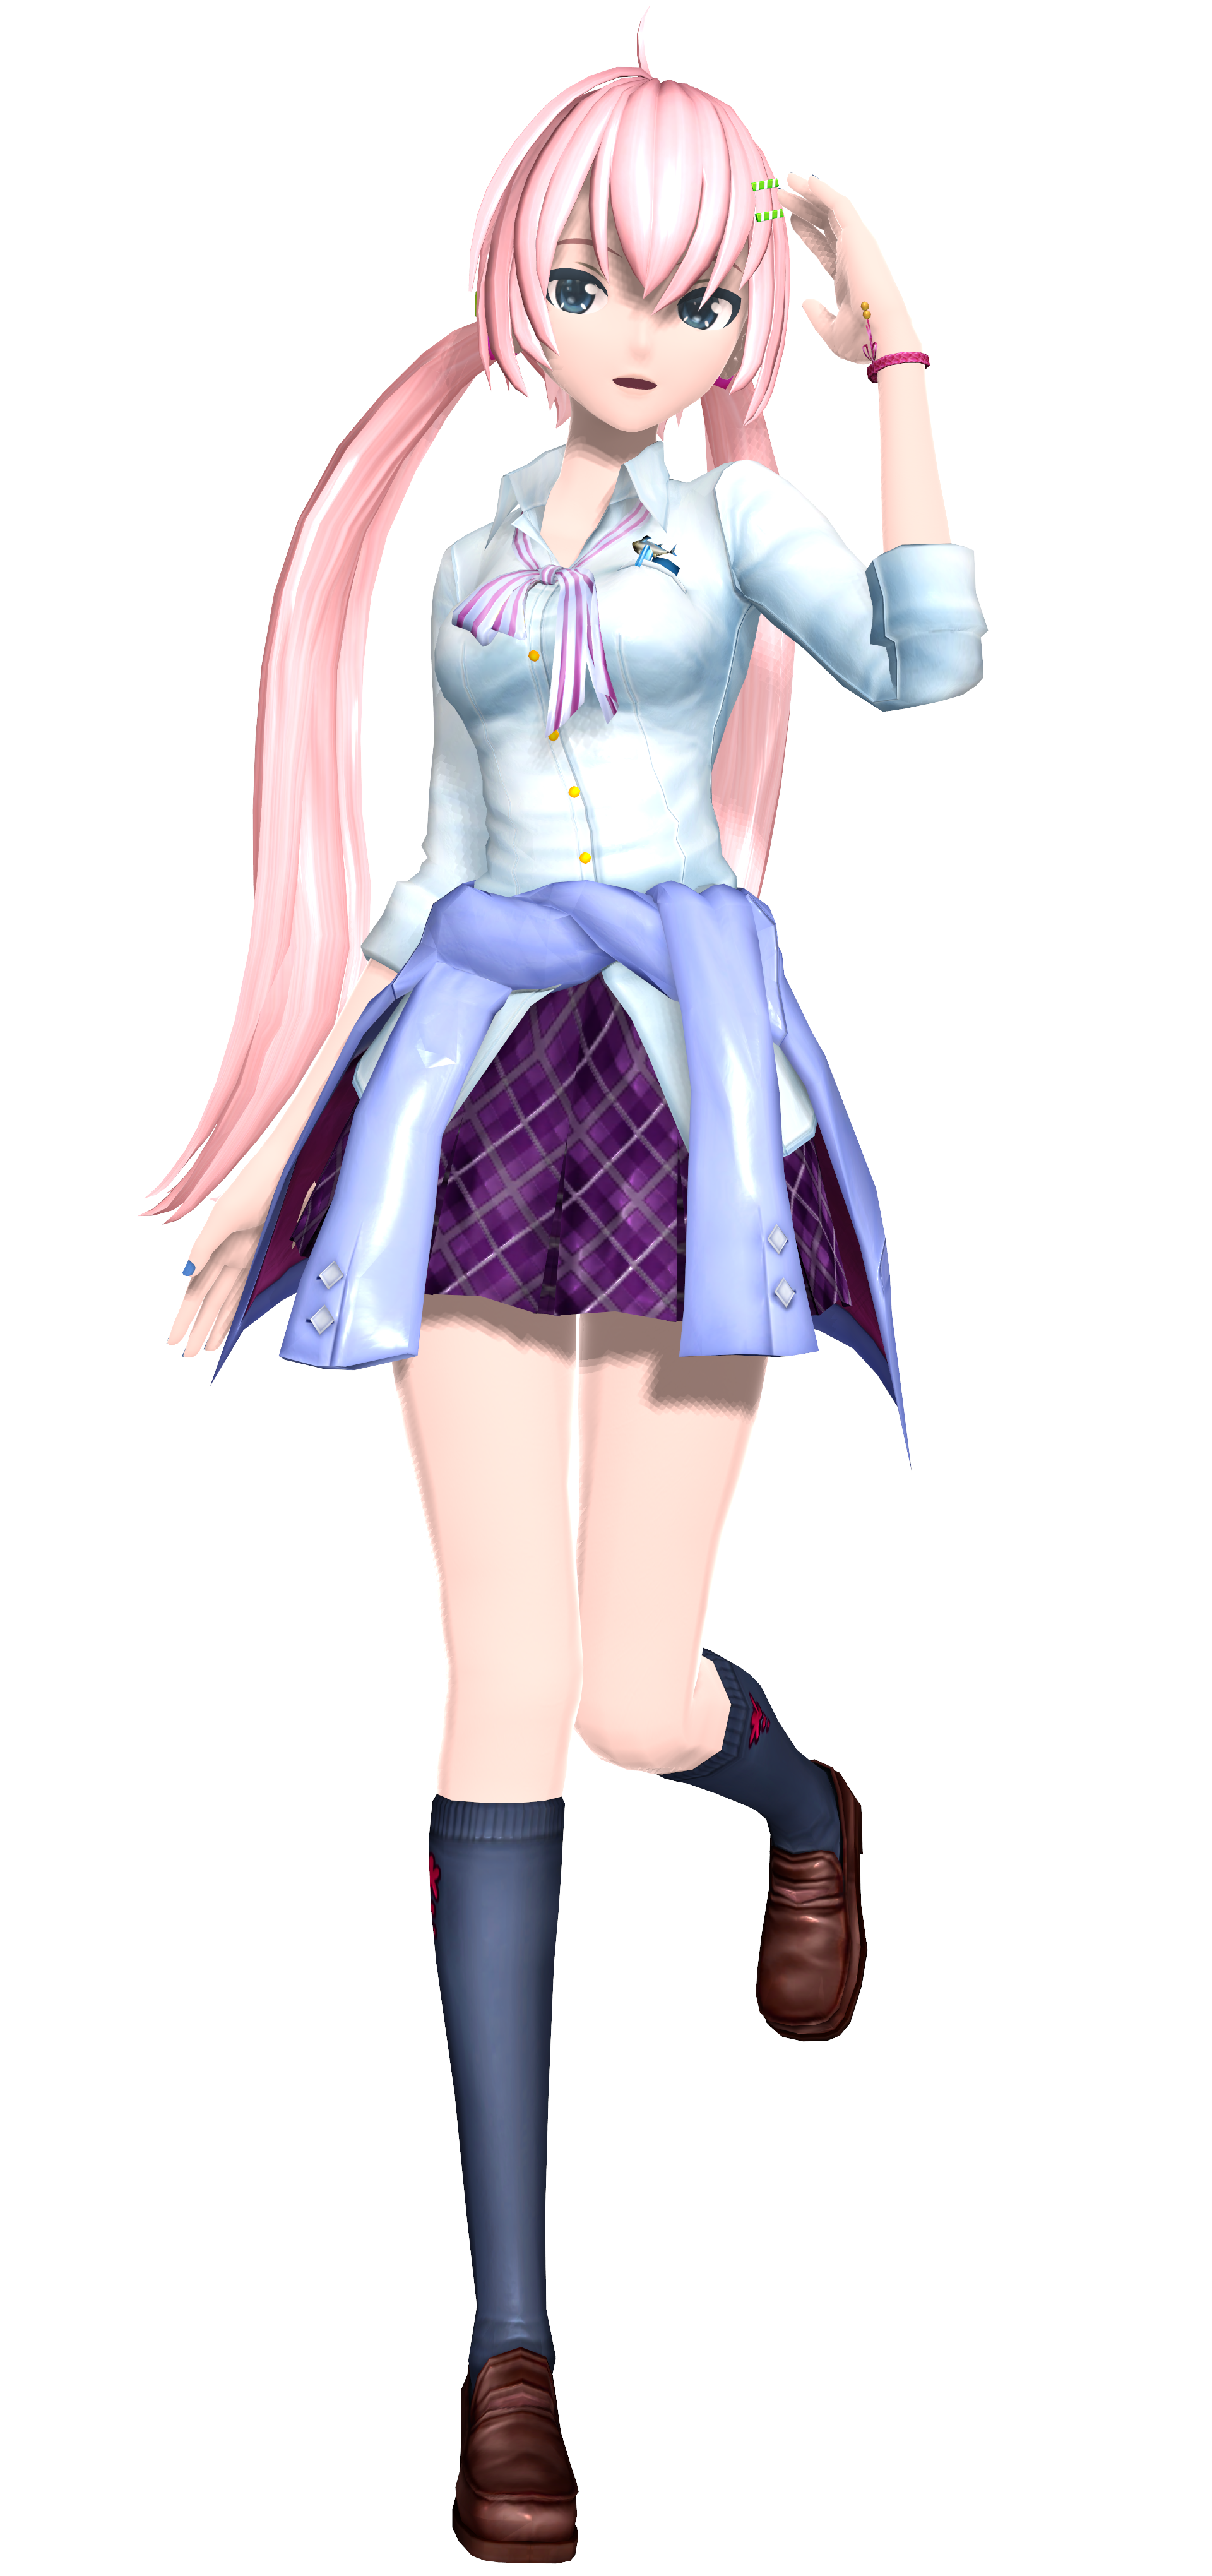 MMD DL - Miku Arcade/RPG model by NoUsernameIncluded on 